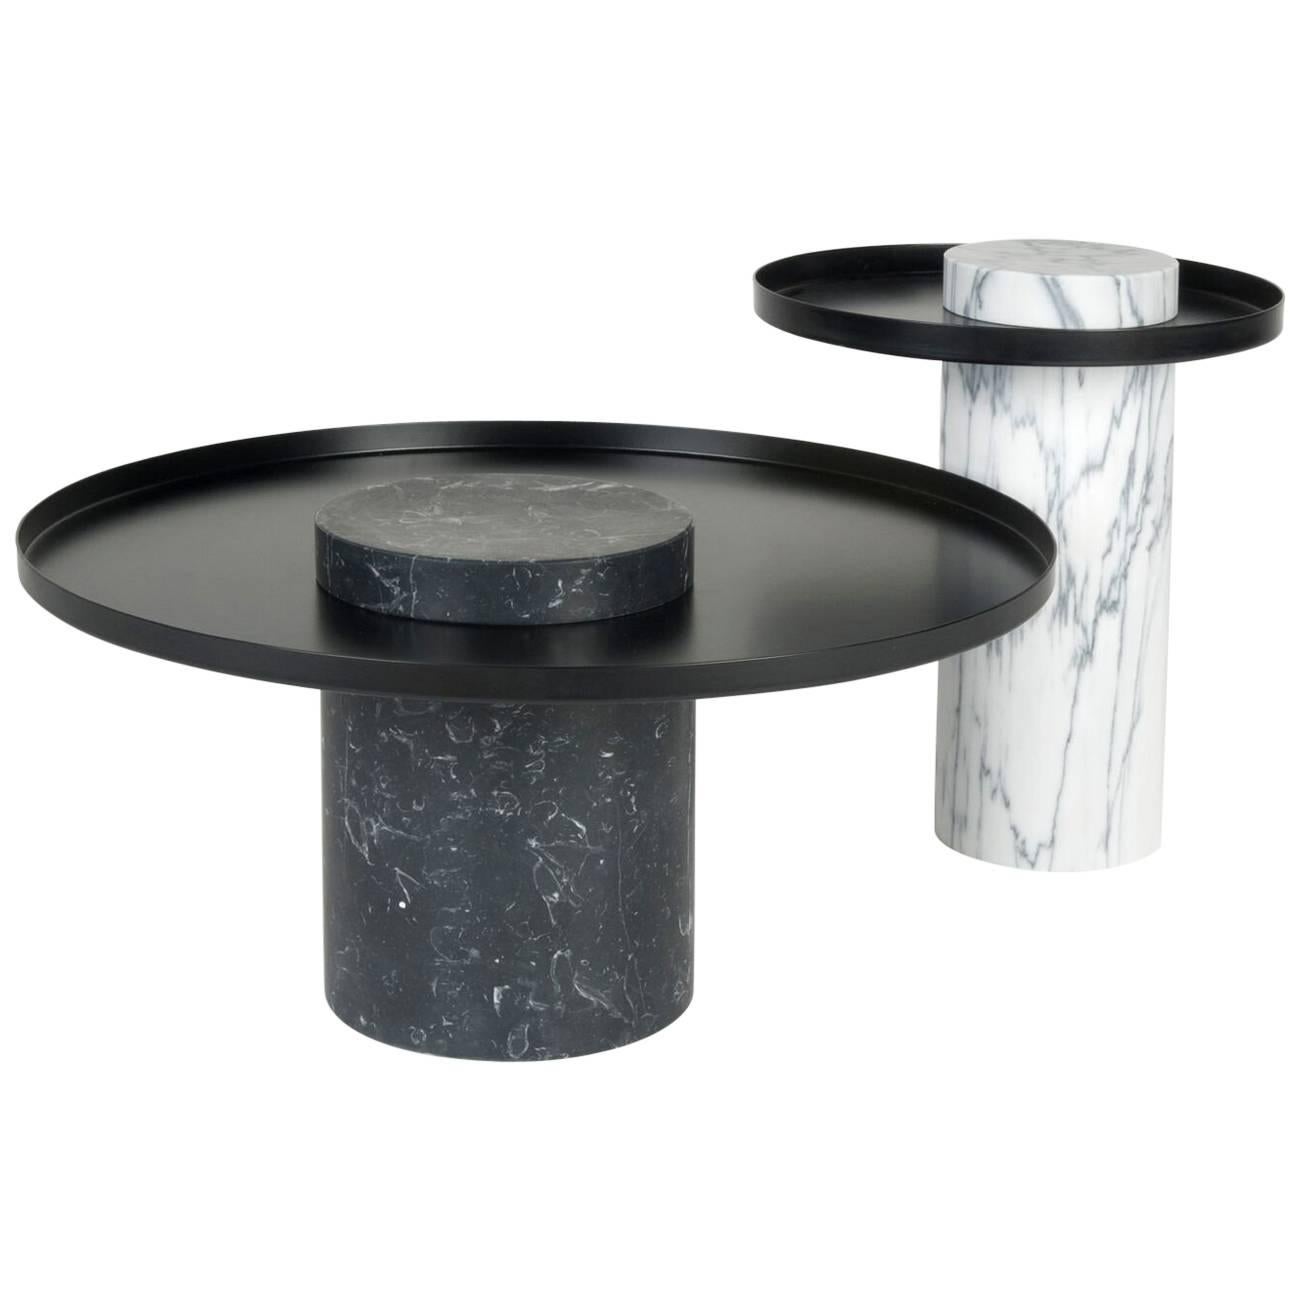 Salute is a family of tables.
Each element can be used alone (coffee table, occasional table) or combined together to play with different heights and formats as well as combinations of materials. The strong presence of the marble column is lightened